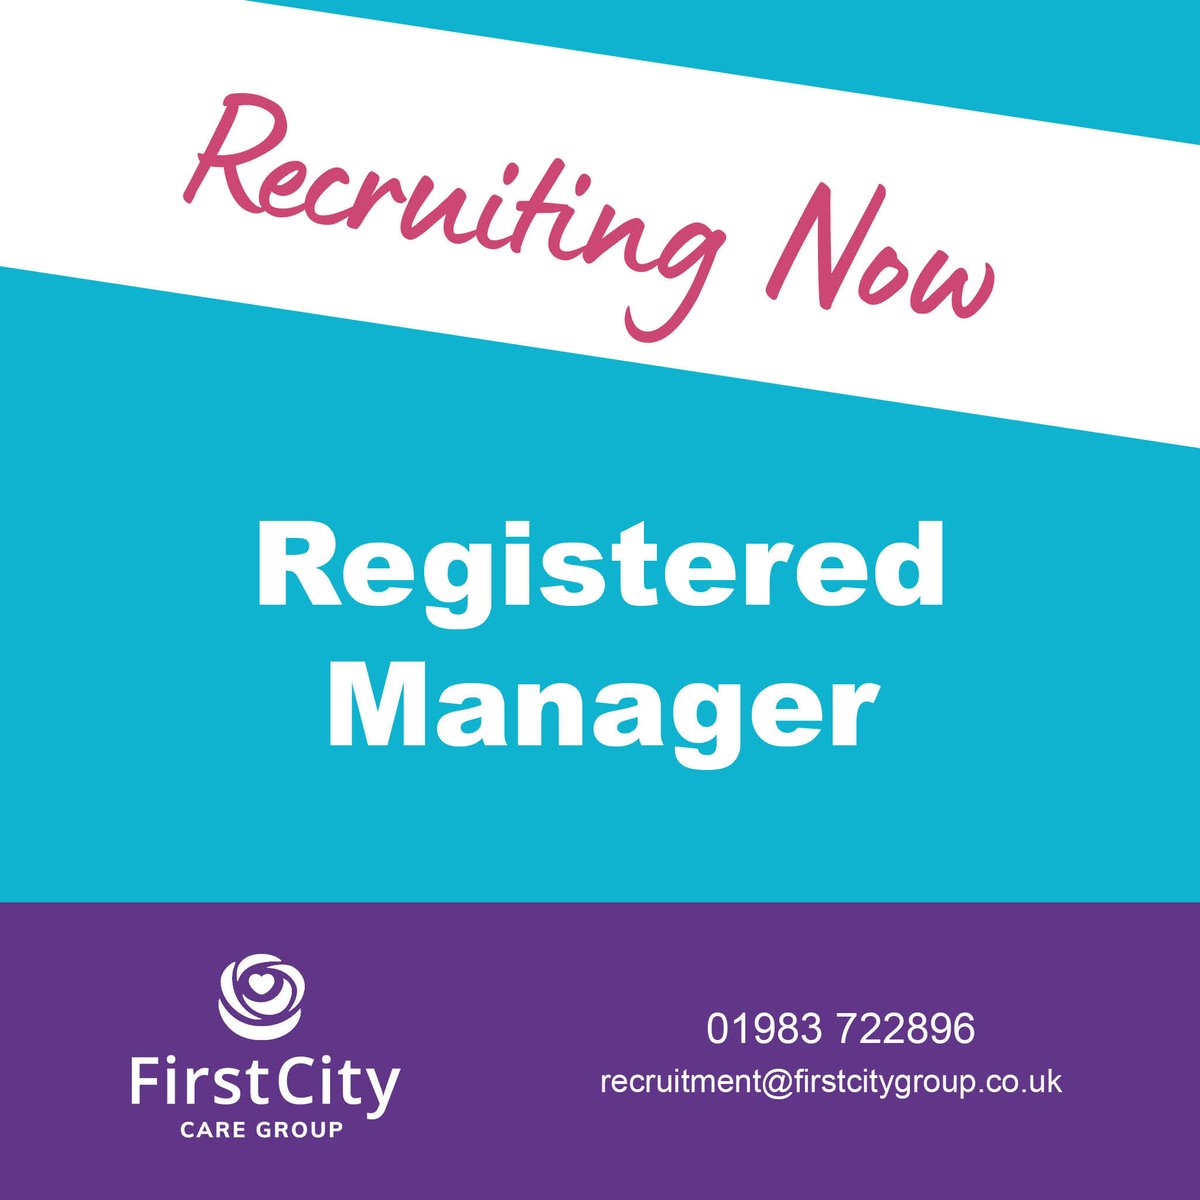 First City Care Group has an exciting opportunity for an experienced Registered Manager to oversee a domiciliary care service in the Isle of Wight.

firstcitynursing.co.uk/jobs/details/i…

#opportunity #registeredmanager #healthcare #careerincare #carework #registeredcaremanager #isleofwight